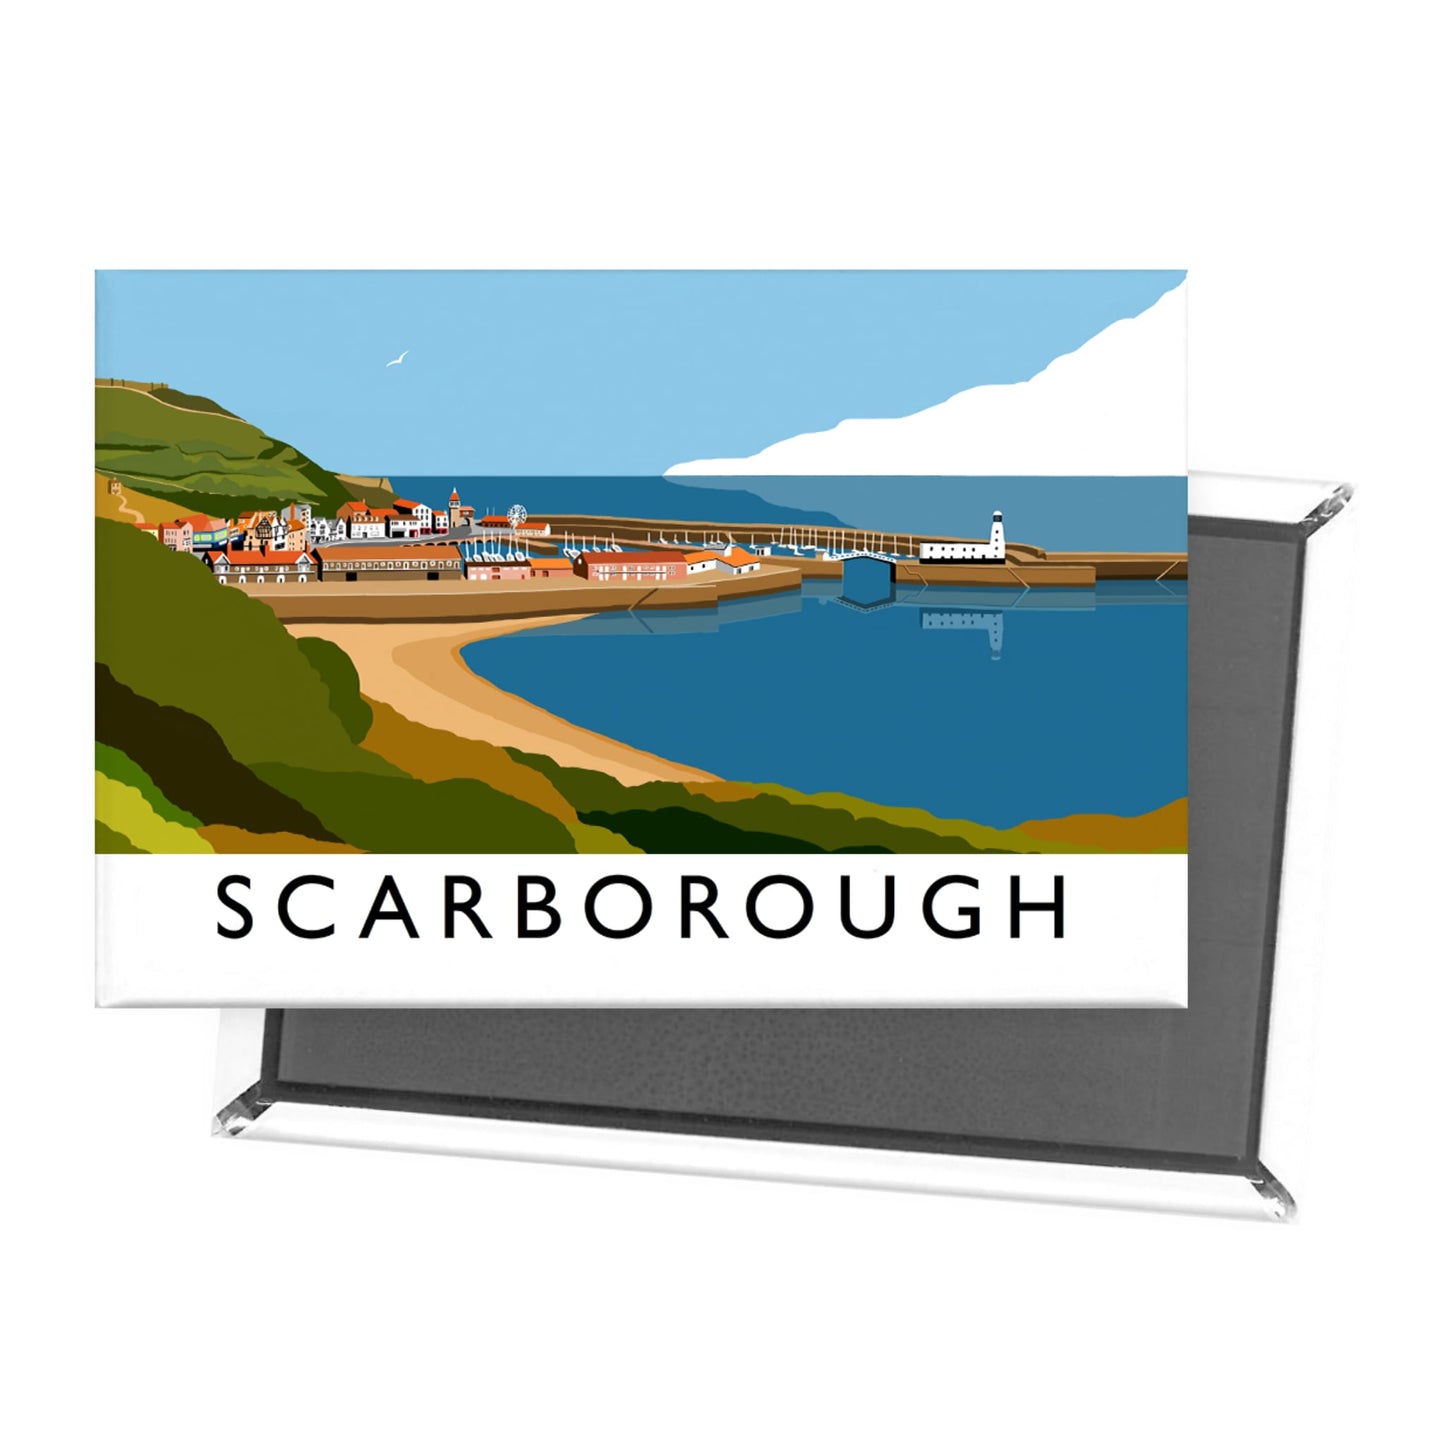 Scarborough Magnet - The Great Yorkshire Shop